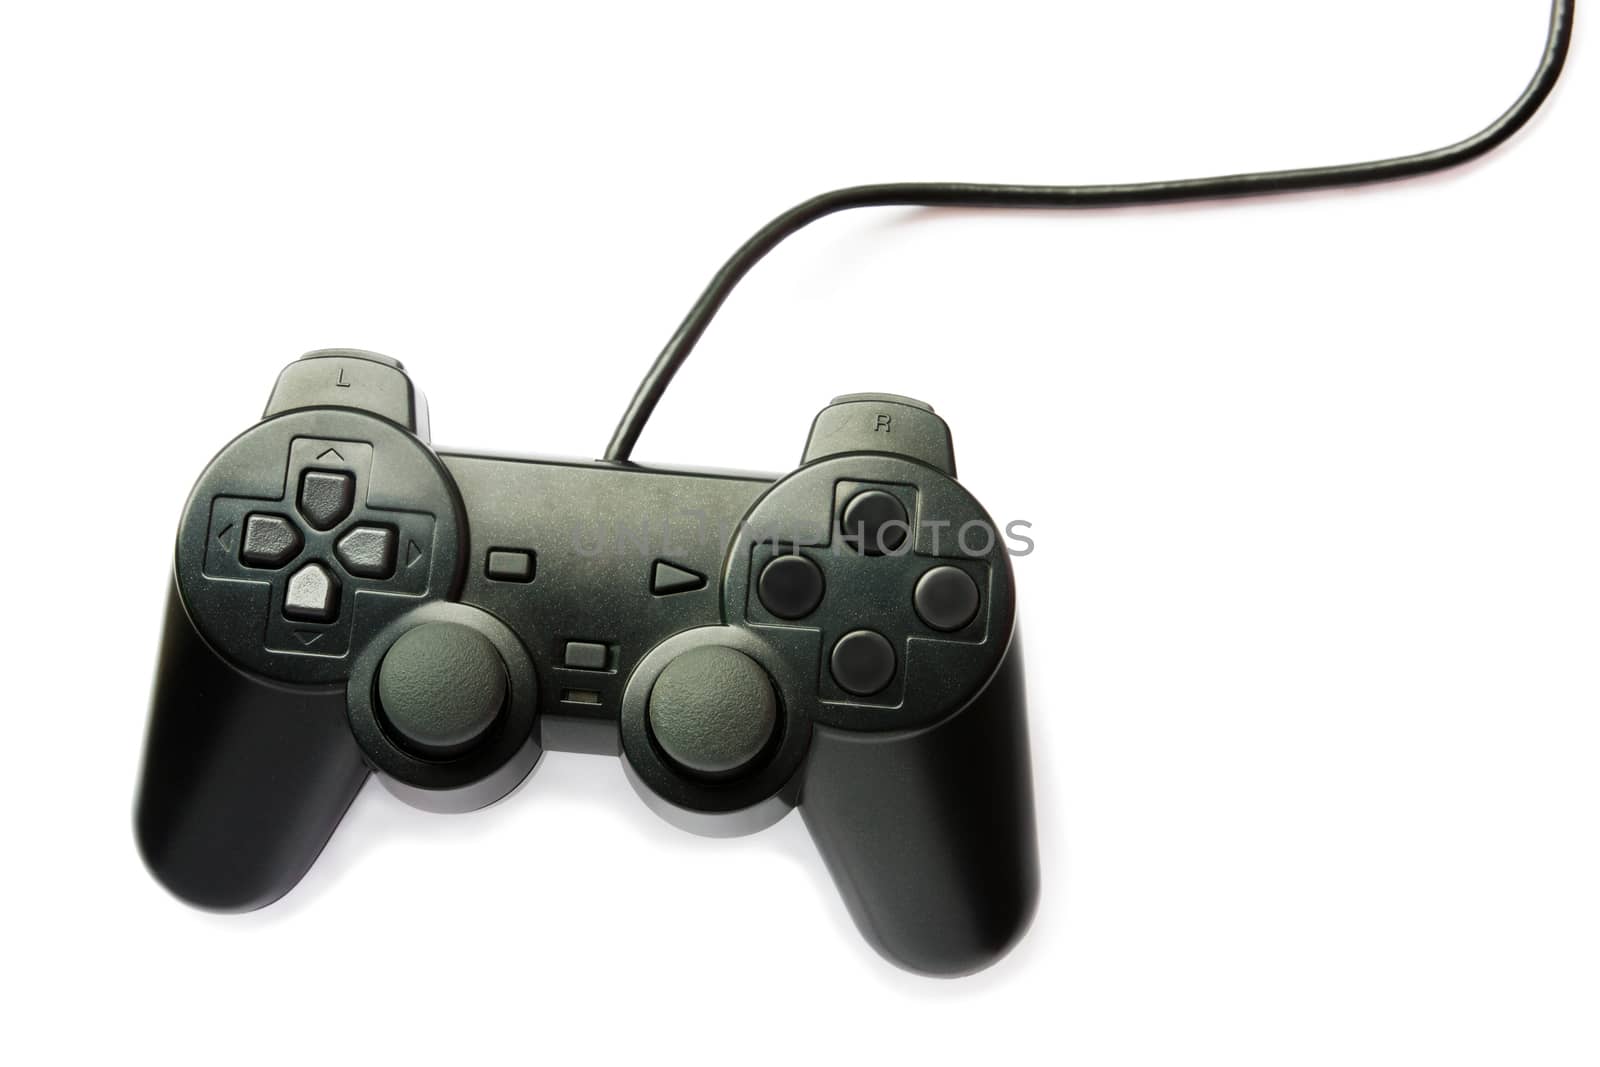 Black game controller isolated on white background